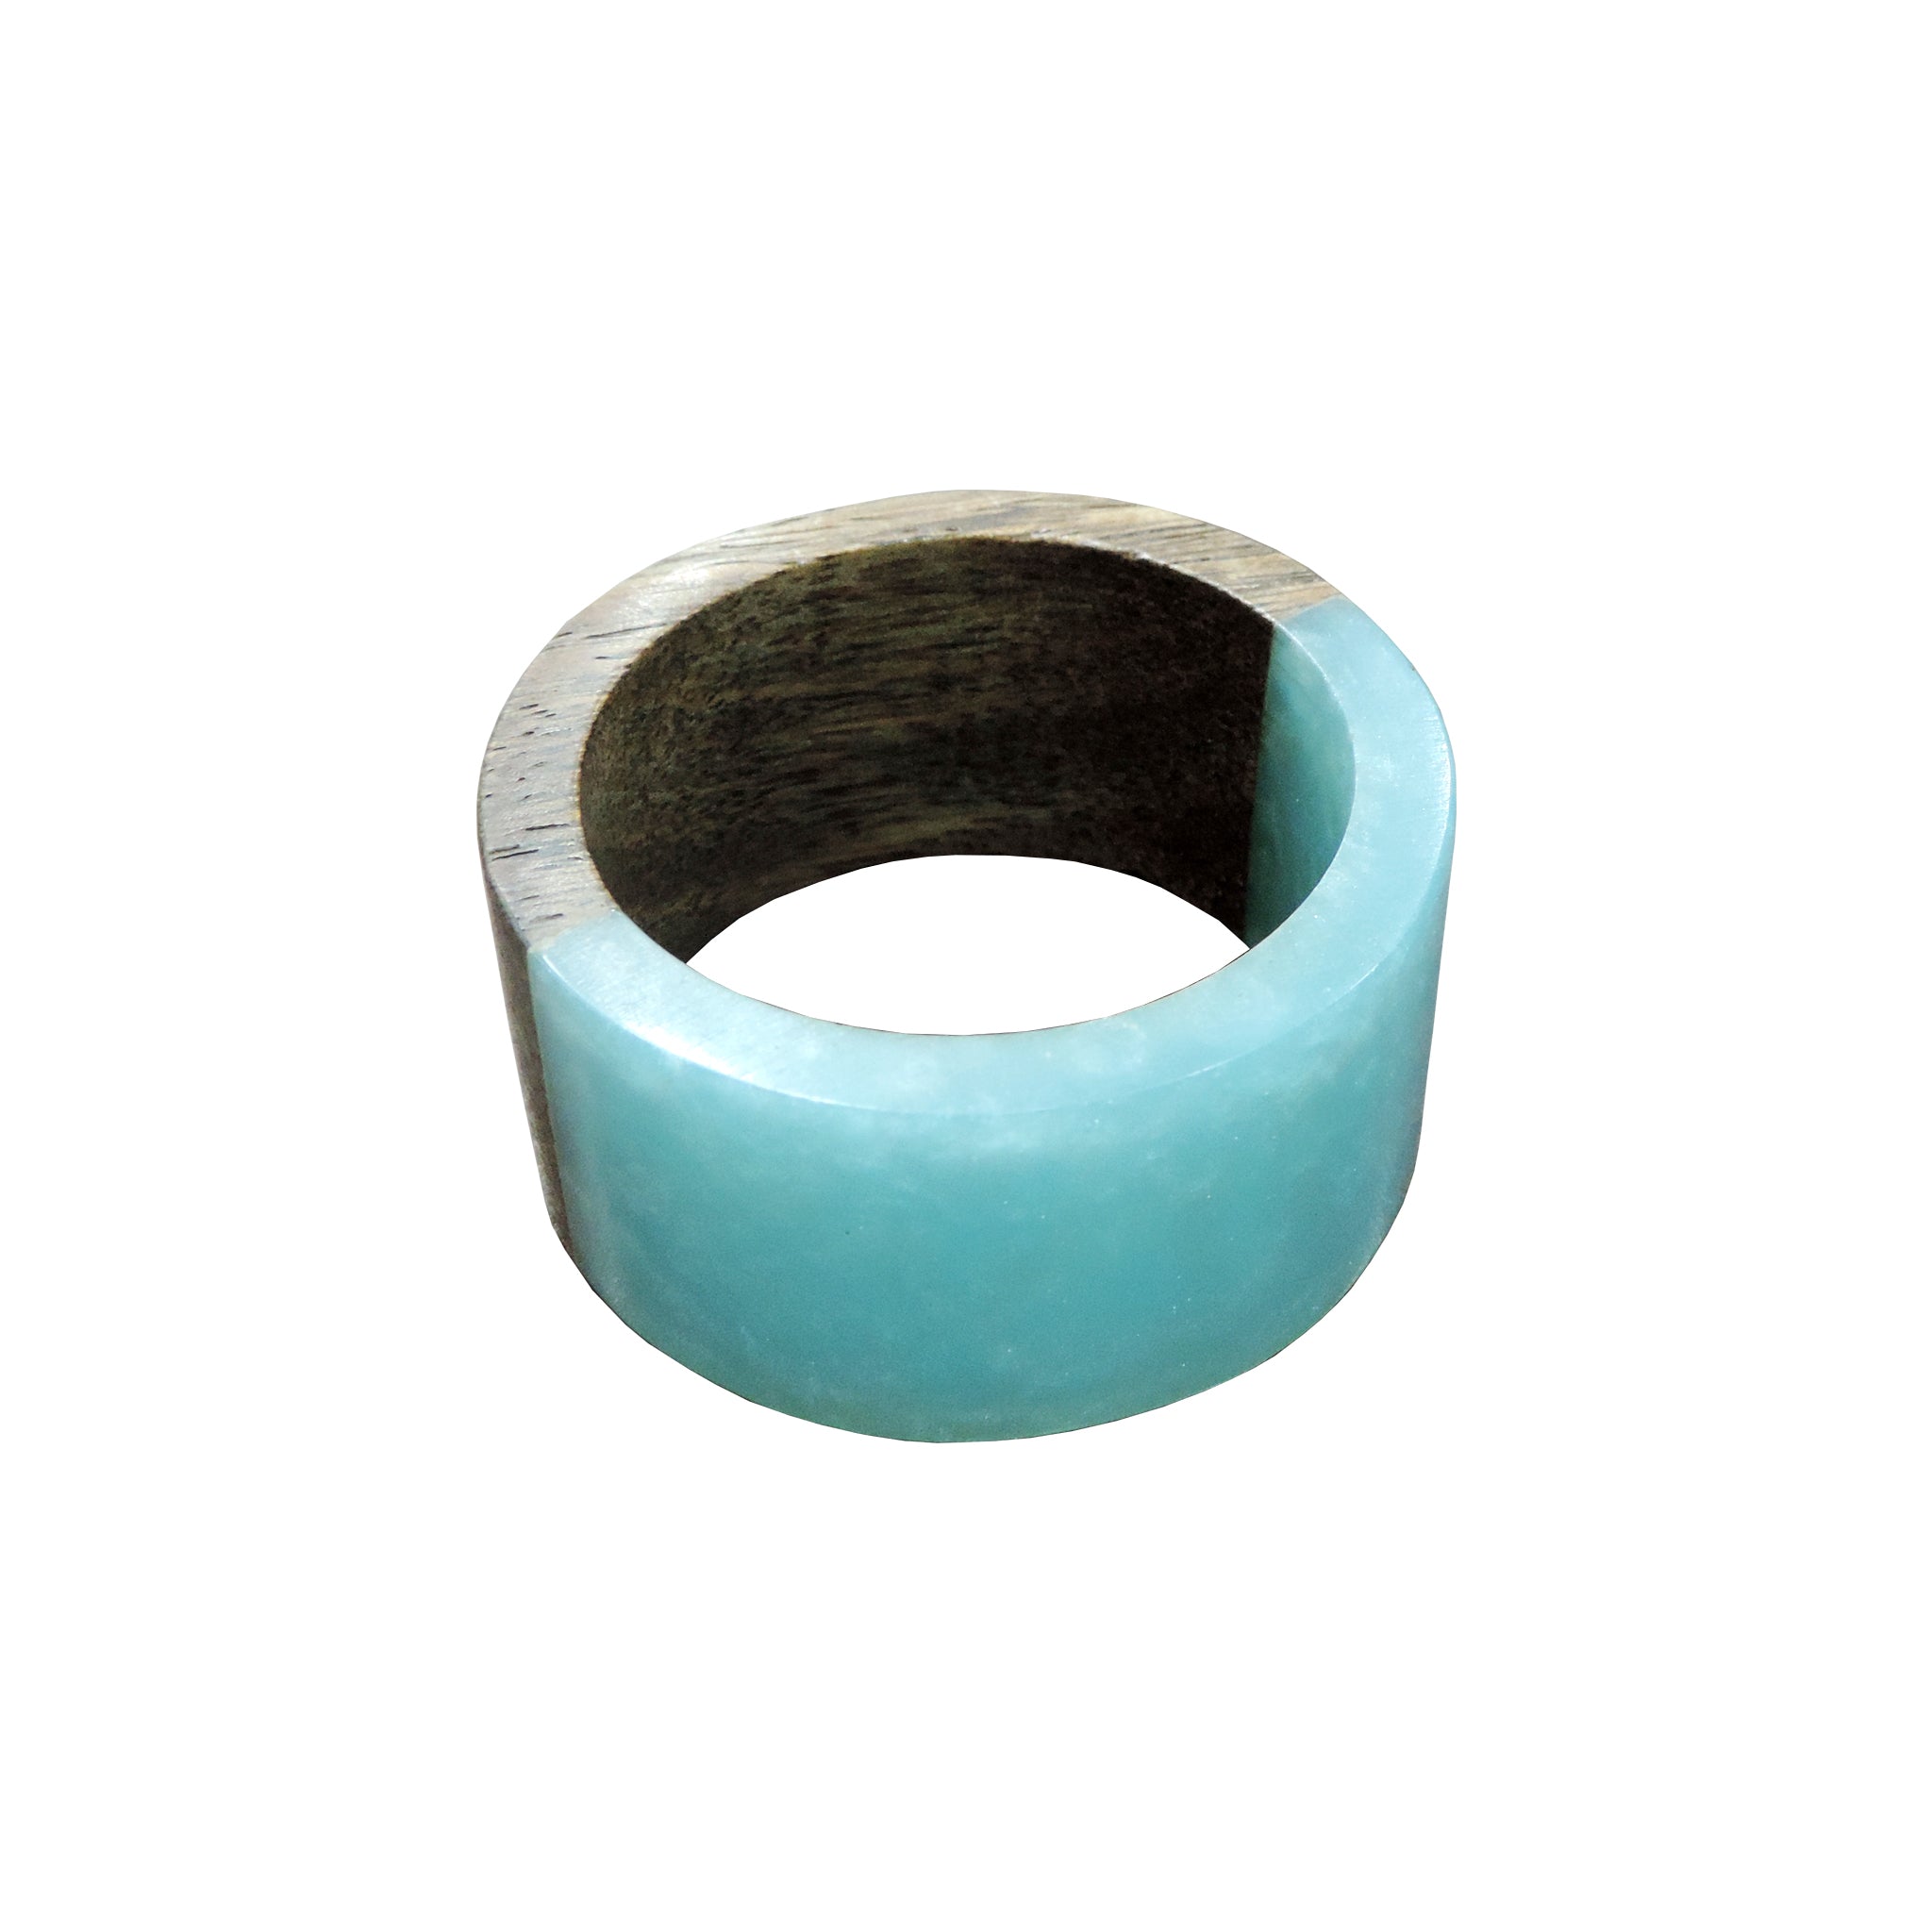 Linen by Trunkin'/ Wood with resin Round Napkin Ring Set of 4 / Aqua/2"*2"